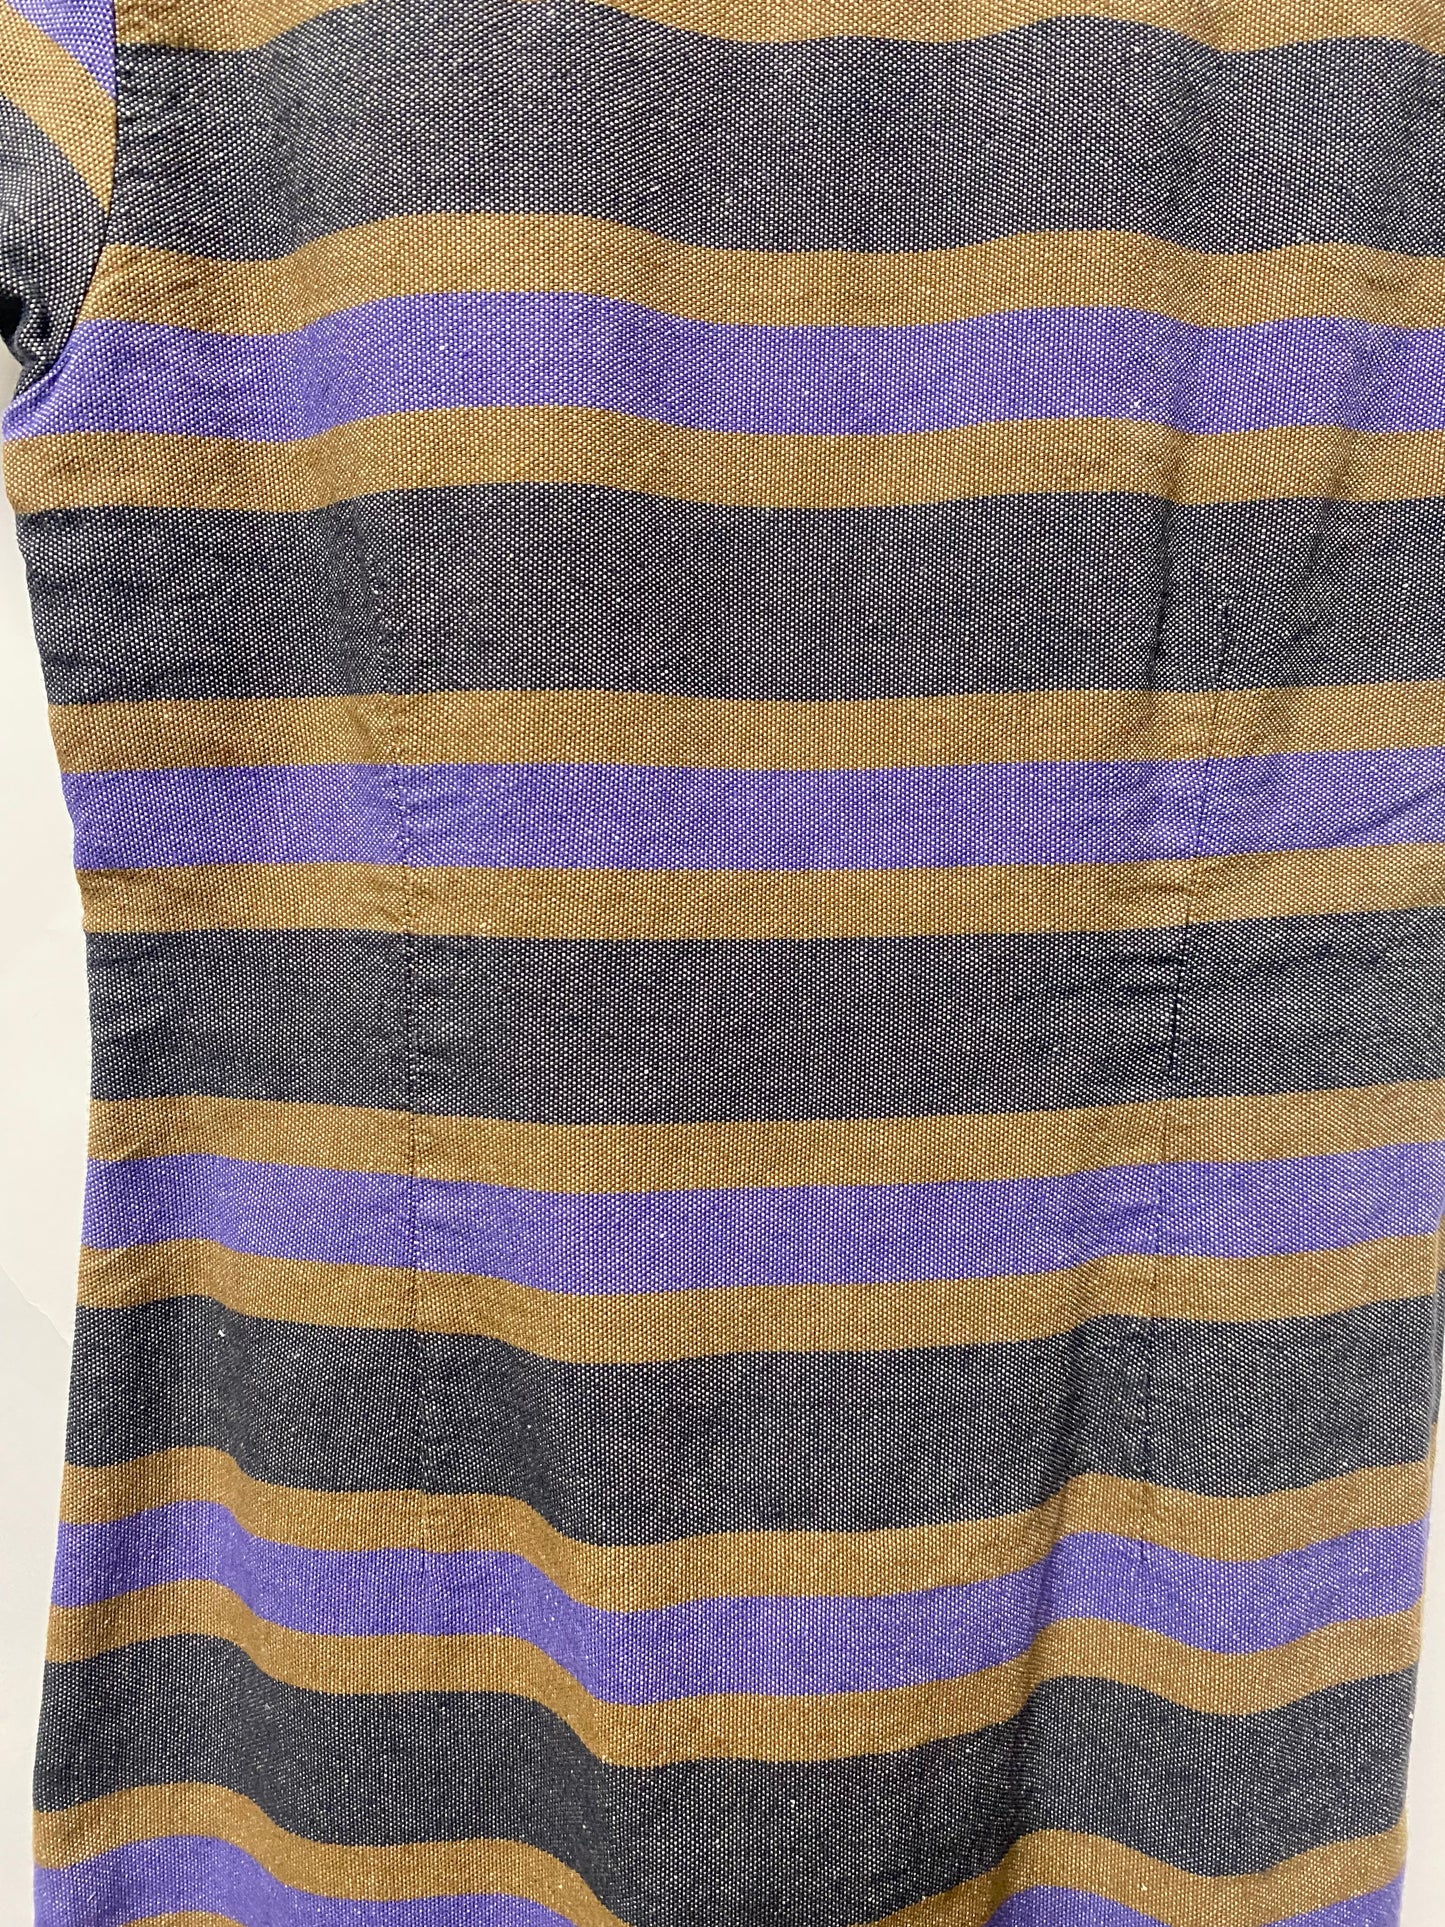 Boden Blue, Purple and Brown Striped Cotton and Linen Mid Length Dress with Belt 14